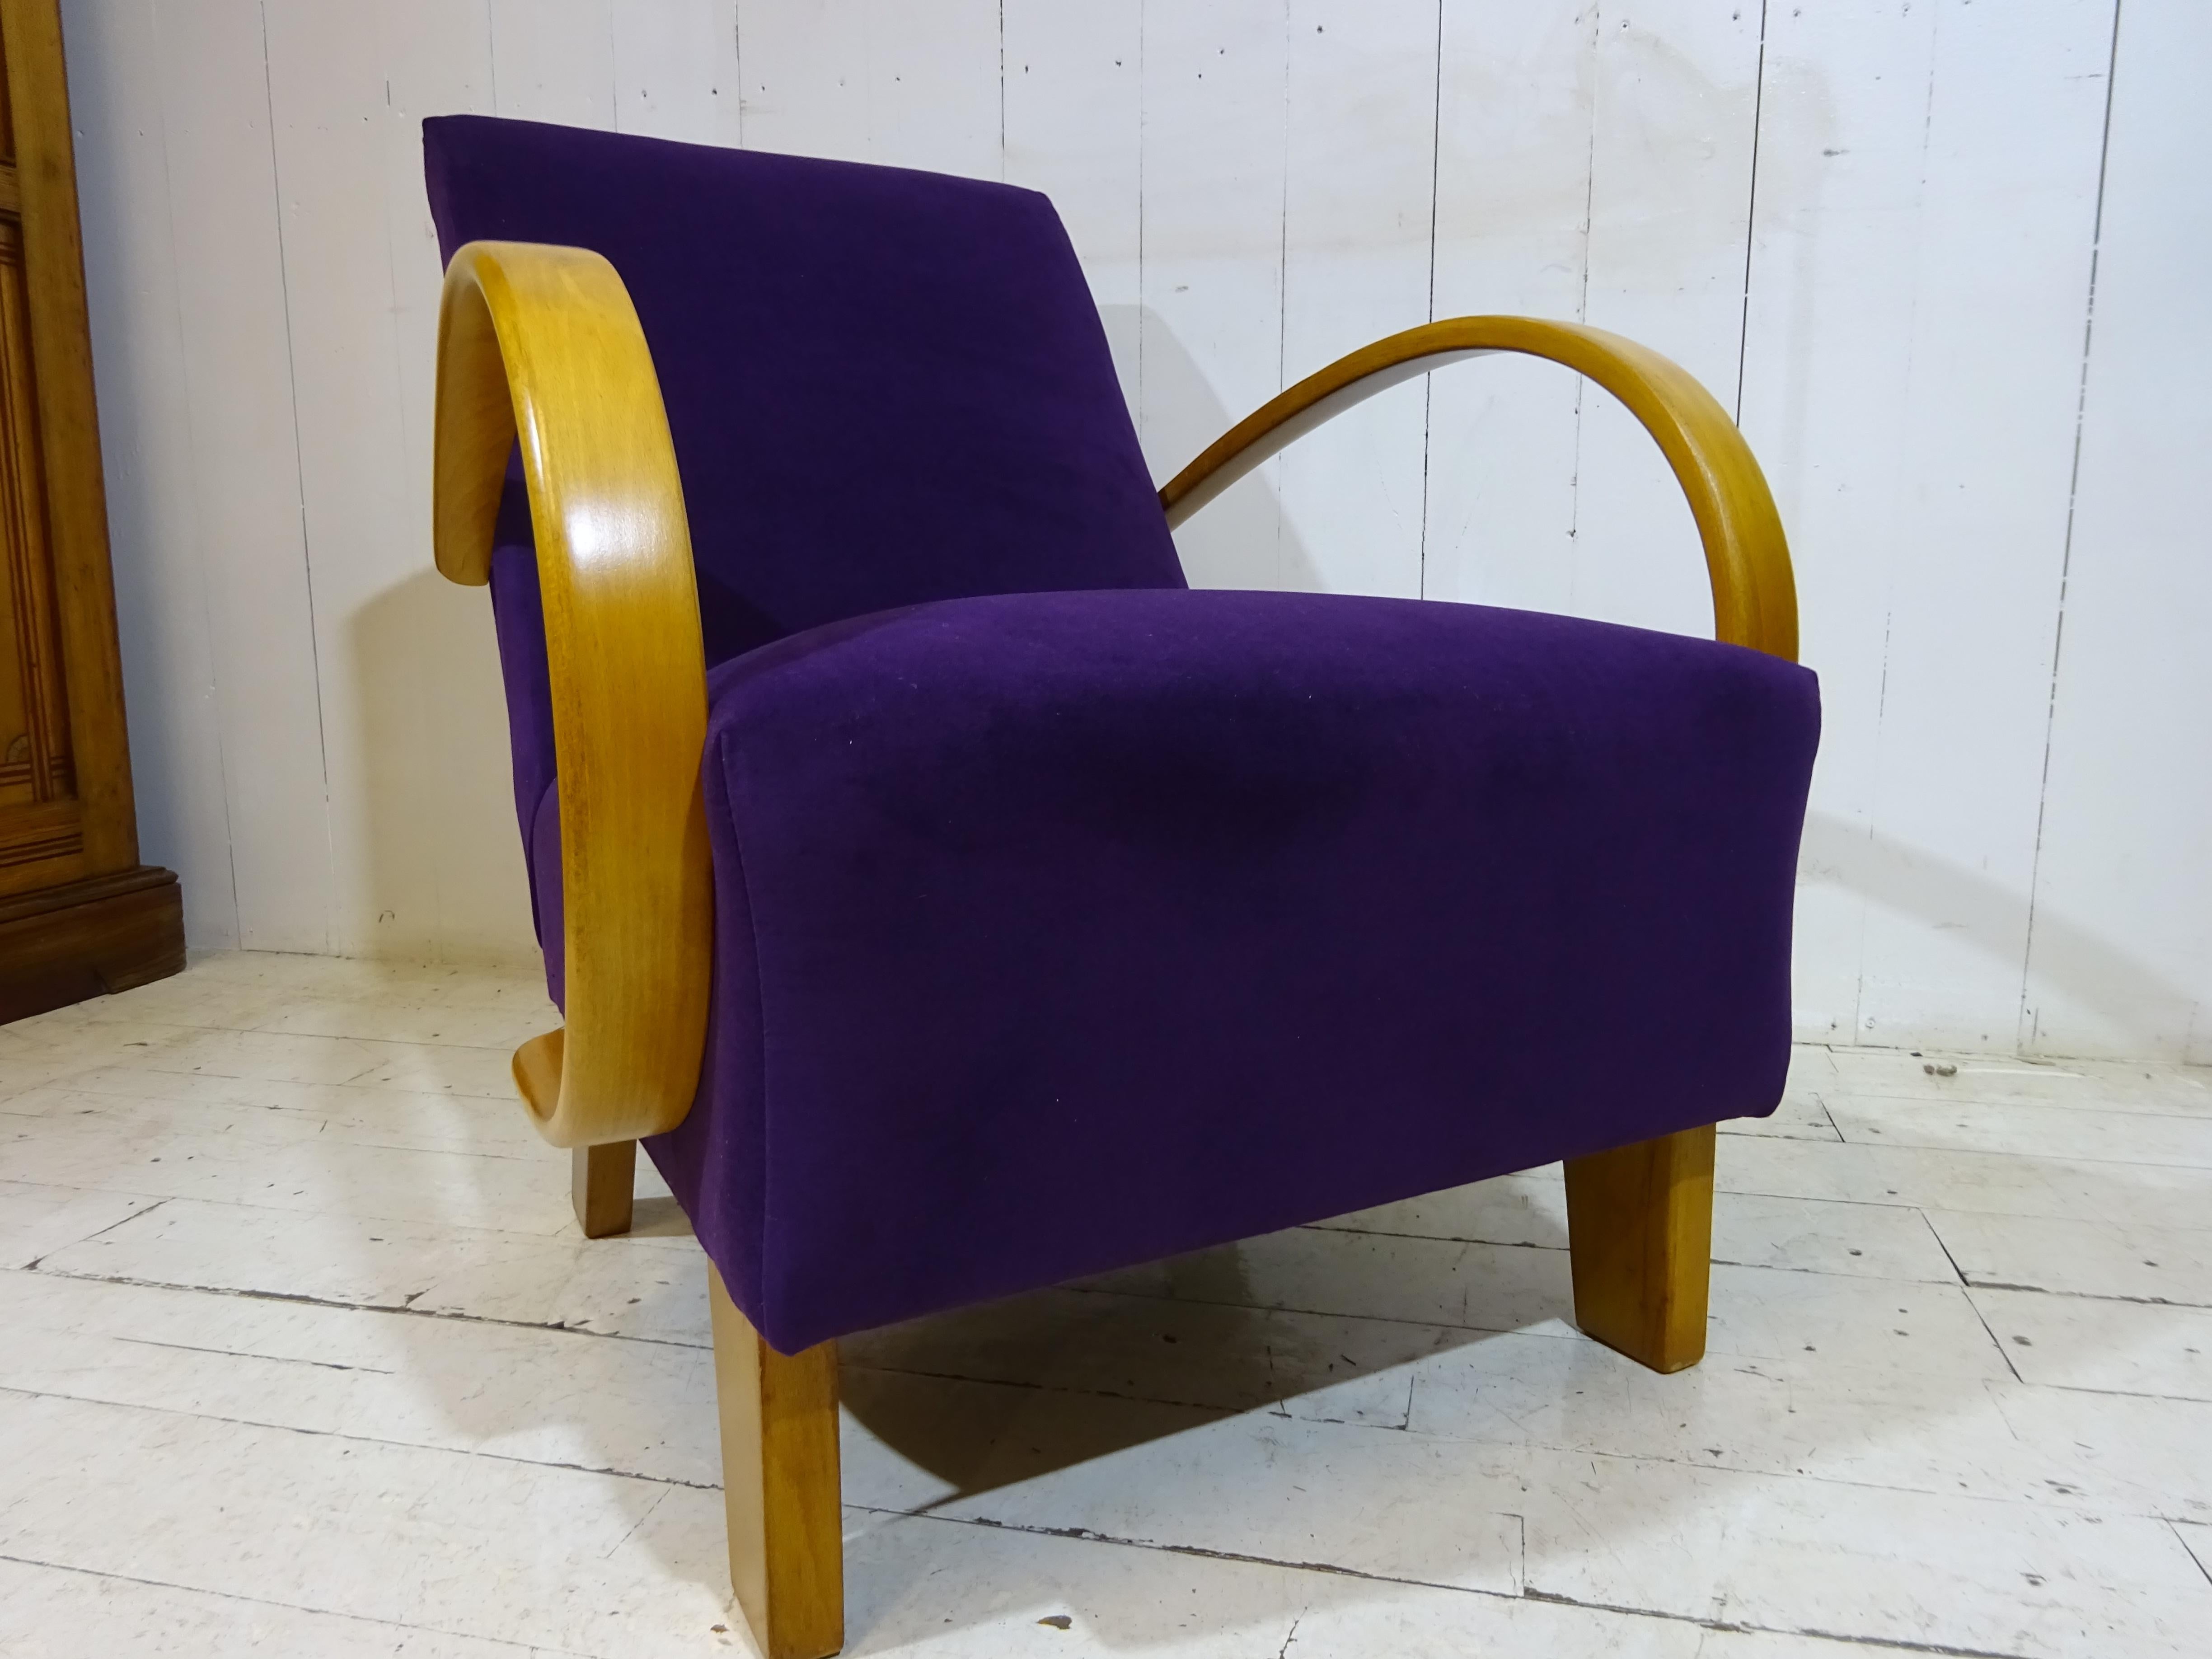 A firm favourite with our regular customers!

This is an original circa 1940's Halabala armchair. Now fully restored this is a fabulous looking chair witht the distinctive Halabala shape.

Solid beech and oak frame has been fully restored with